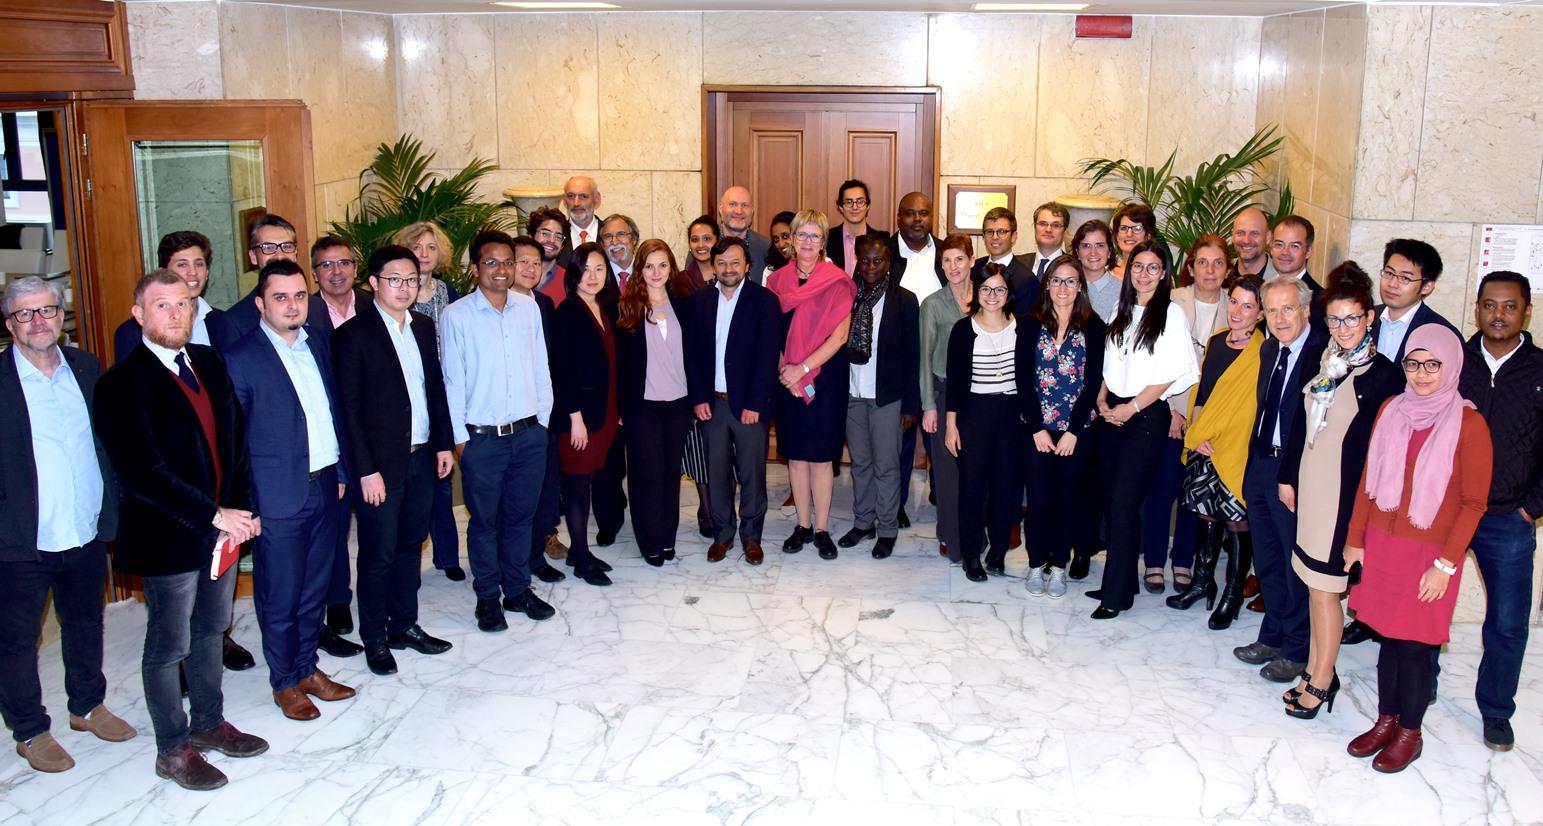 Group photo at the 3rd meeting of the ITF Safer City Streets network in Rome, ACI headquarters